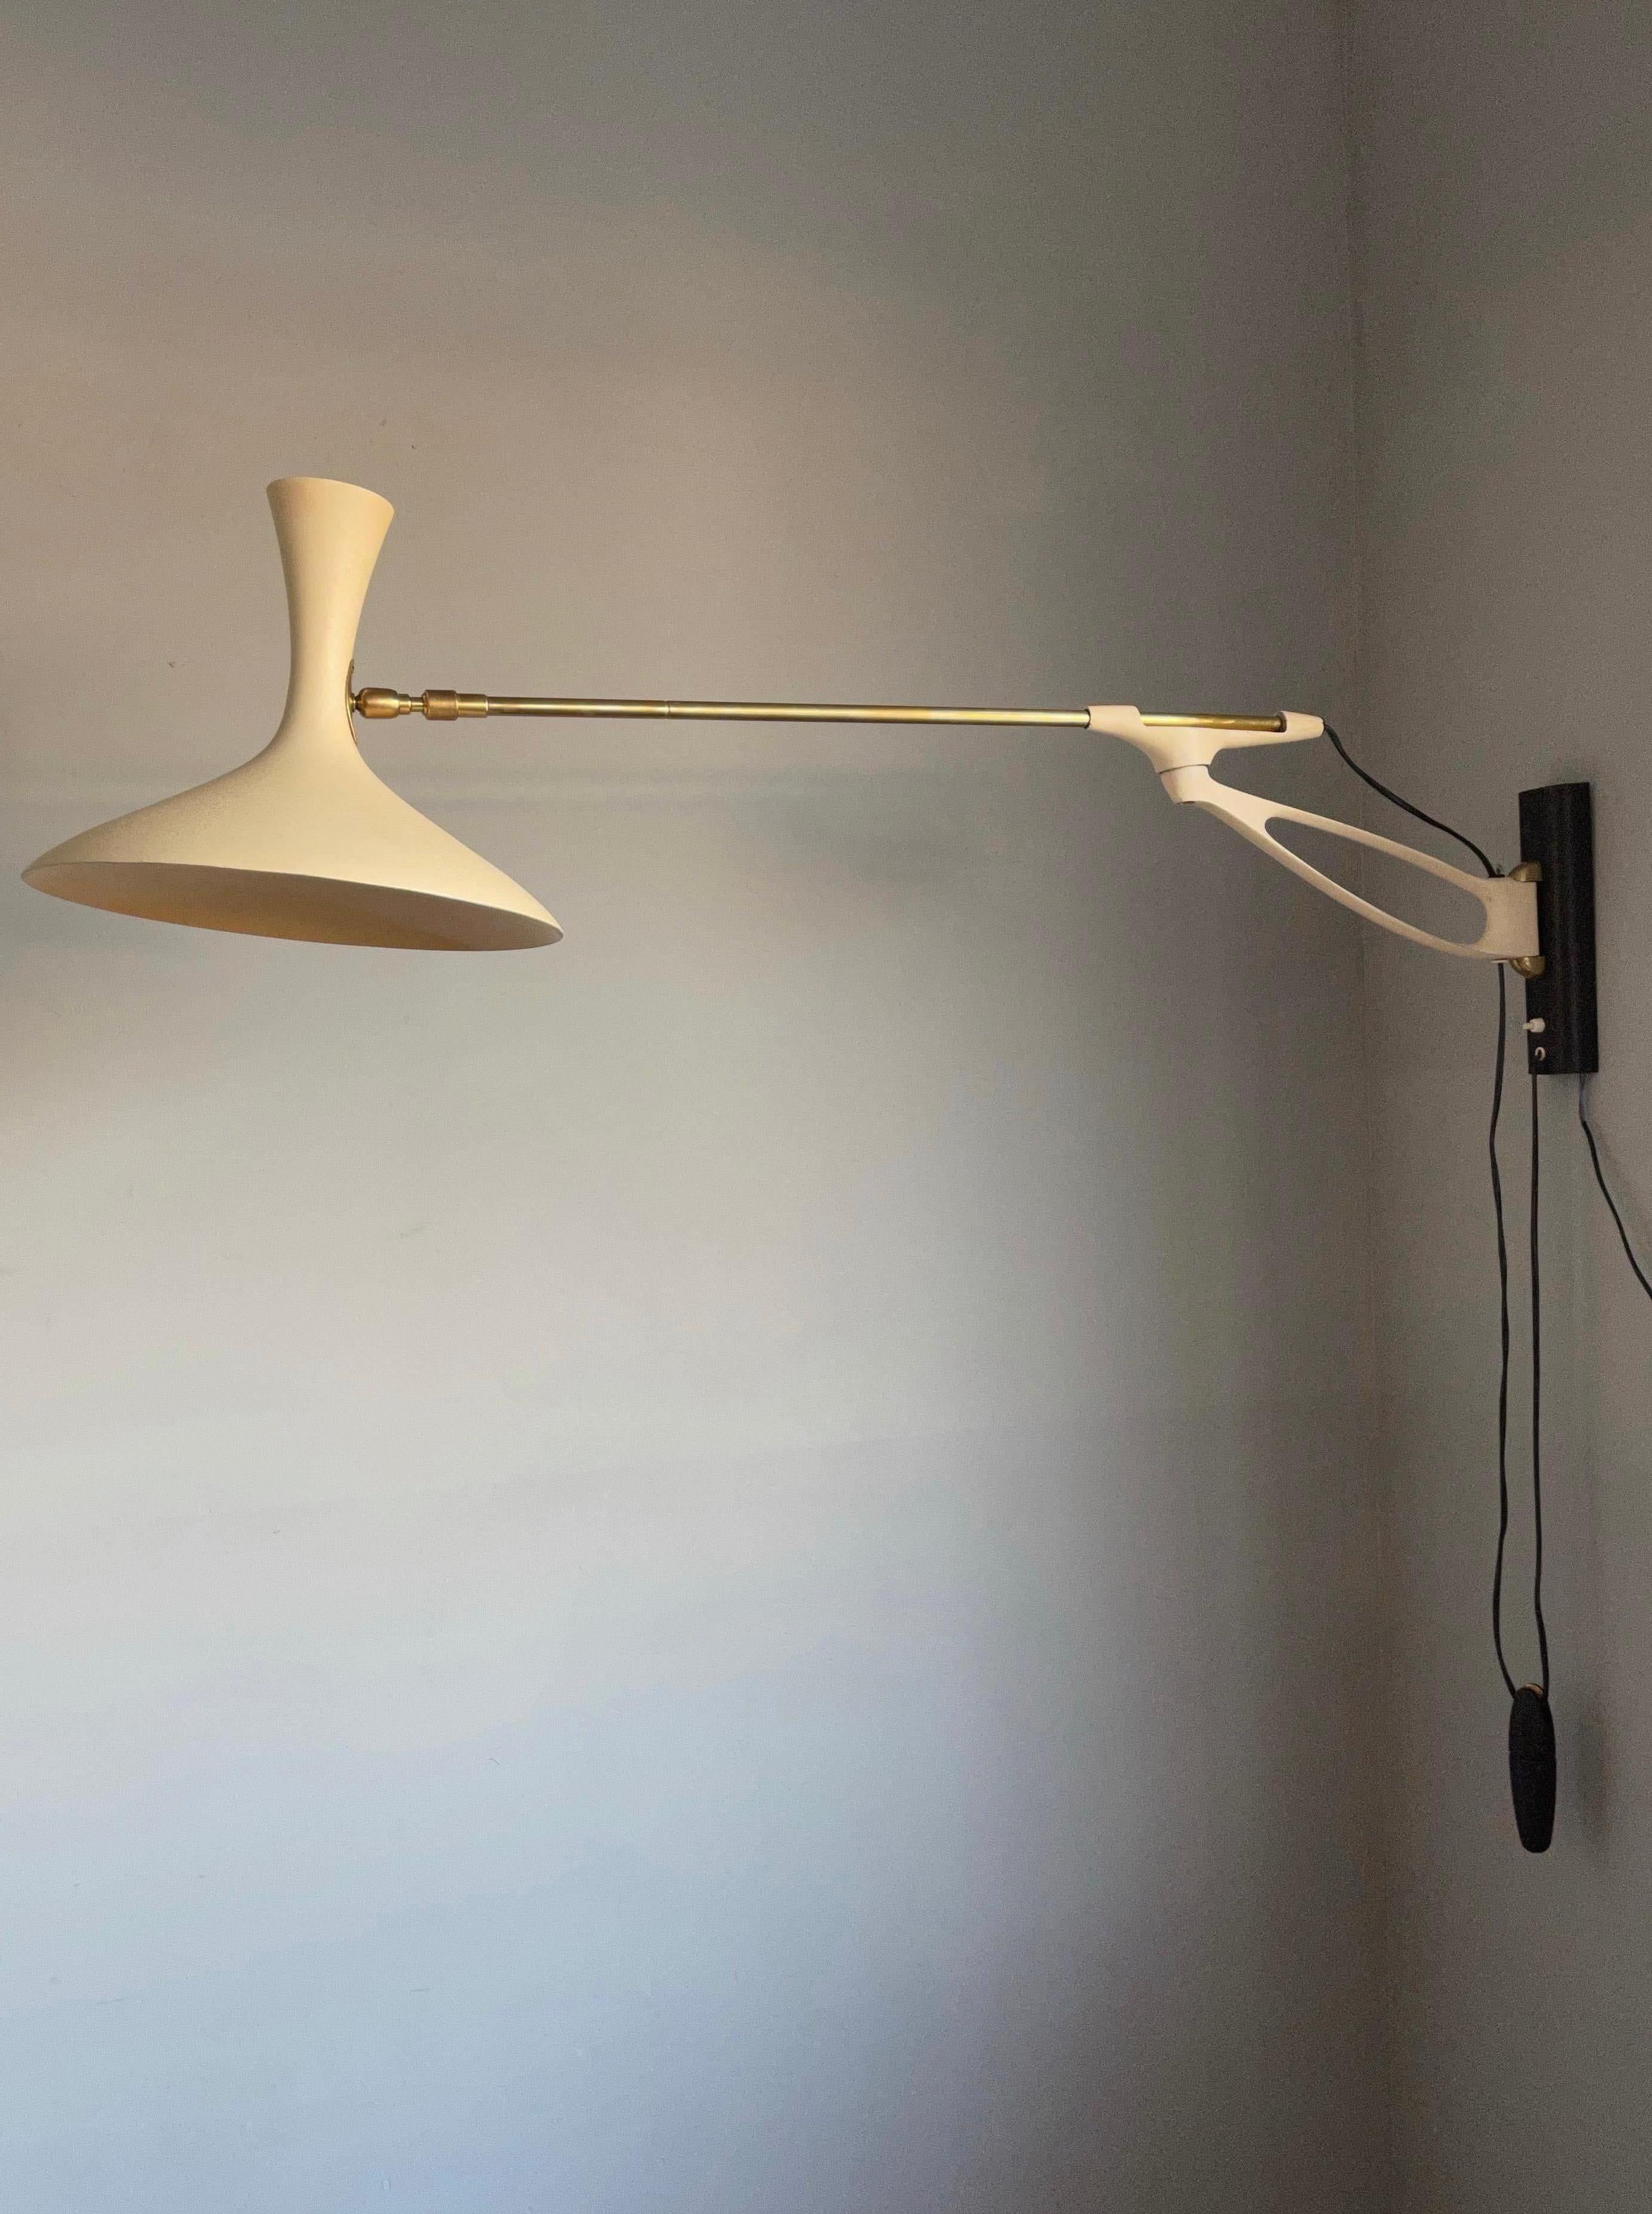 Wonderfully stylish and pleasing to the eye swing light, easy to wall mount.

This rare design wall lamp from the midcentury era is by Louis Kalff and it was manufactured by Gebrüder Cosack Leuchten, Germany. For the collectors of rare and great